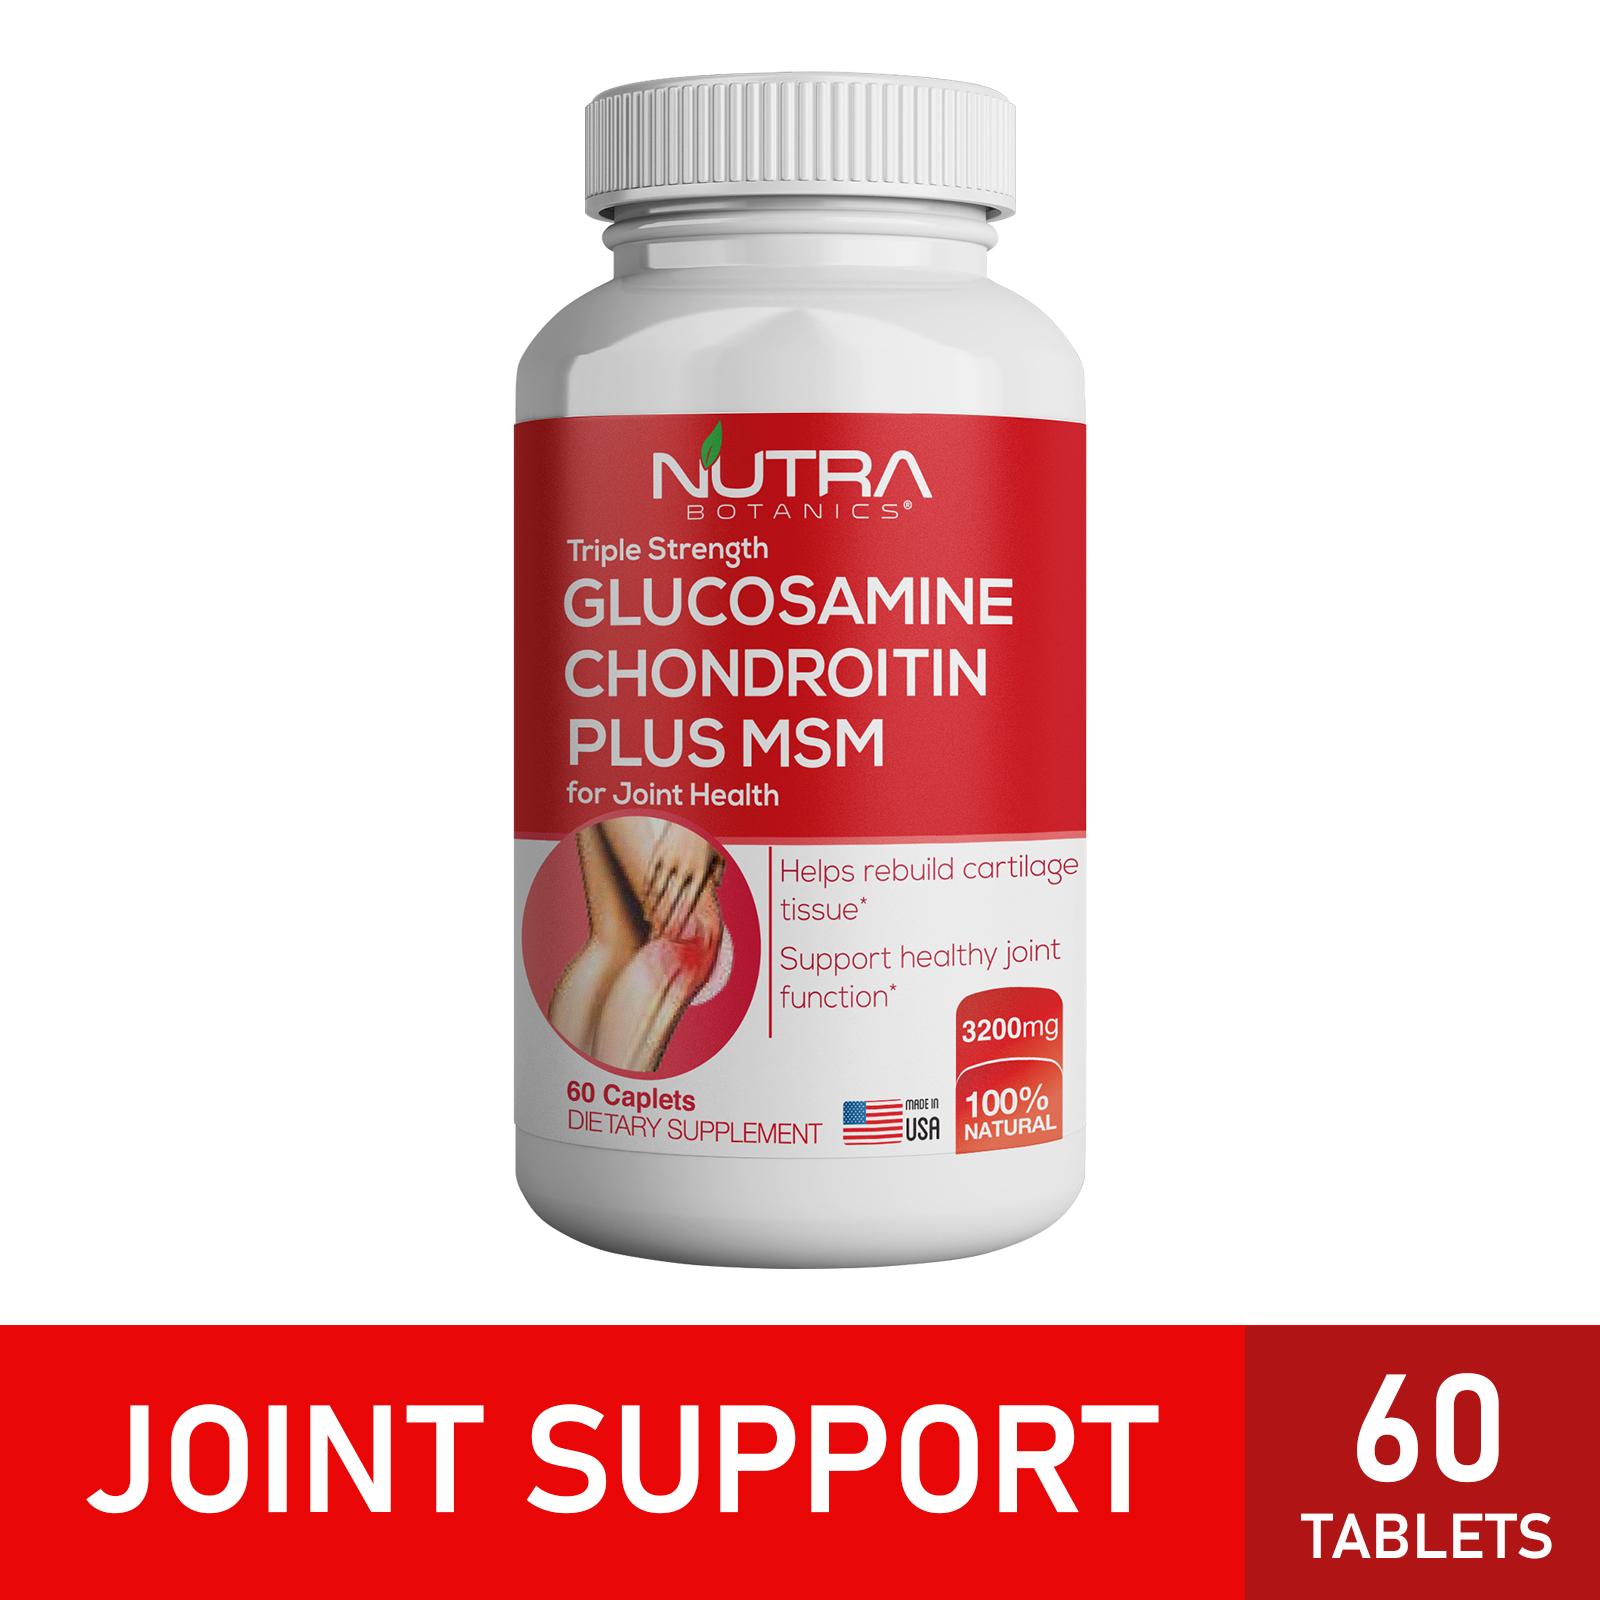 Best Joint Supplements For Elderly In Singapore, Nutra Botanics Glucosamine Triple Strength is the Best Joint Supplements in Singapore, best joint supplements for athletes, best joint supplement for knees, Best Joint Supplements Review, What is the best supplement for knee joints?, What joint supplement do doctors recommend?, What is the safest joint supplement?, Does glucosamine make knees worse?, 10 Best Joint Supplements for Arthritis Pain & Knee Injury, Best Joint Supplements to Cut Pain and Aid Movement, best joint supplement for women, best glucosamine chondroitin supplement on the market, best joint supplement for men, best supplement for joint pain, consumer reports best joint supplements, best supplement for knee cartilage, best joint supplement 2022 consumer reports, What supplements are good for aging joints?, Is glucosamine good for old people?, What supplement is commonly taken by seniors to help alleviate arthritis pain?, What can you take to lubricate your joints?, 